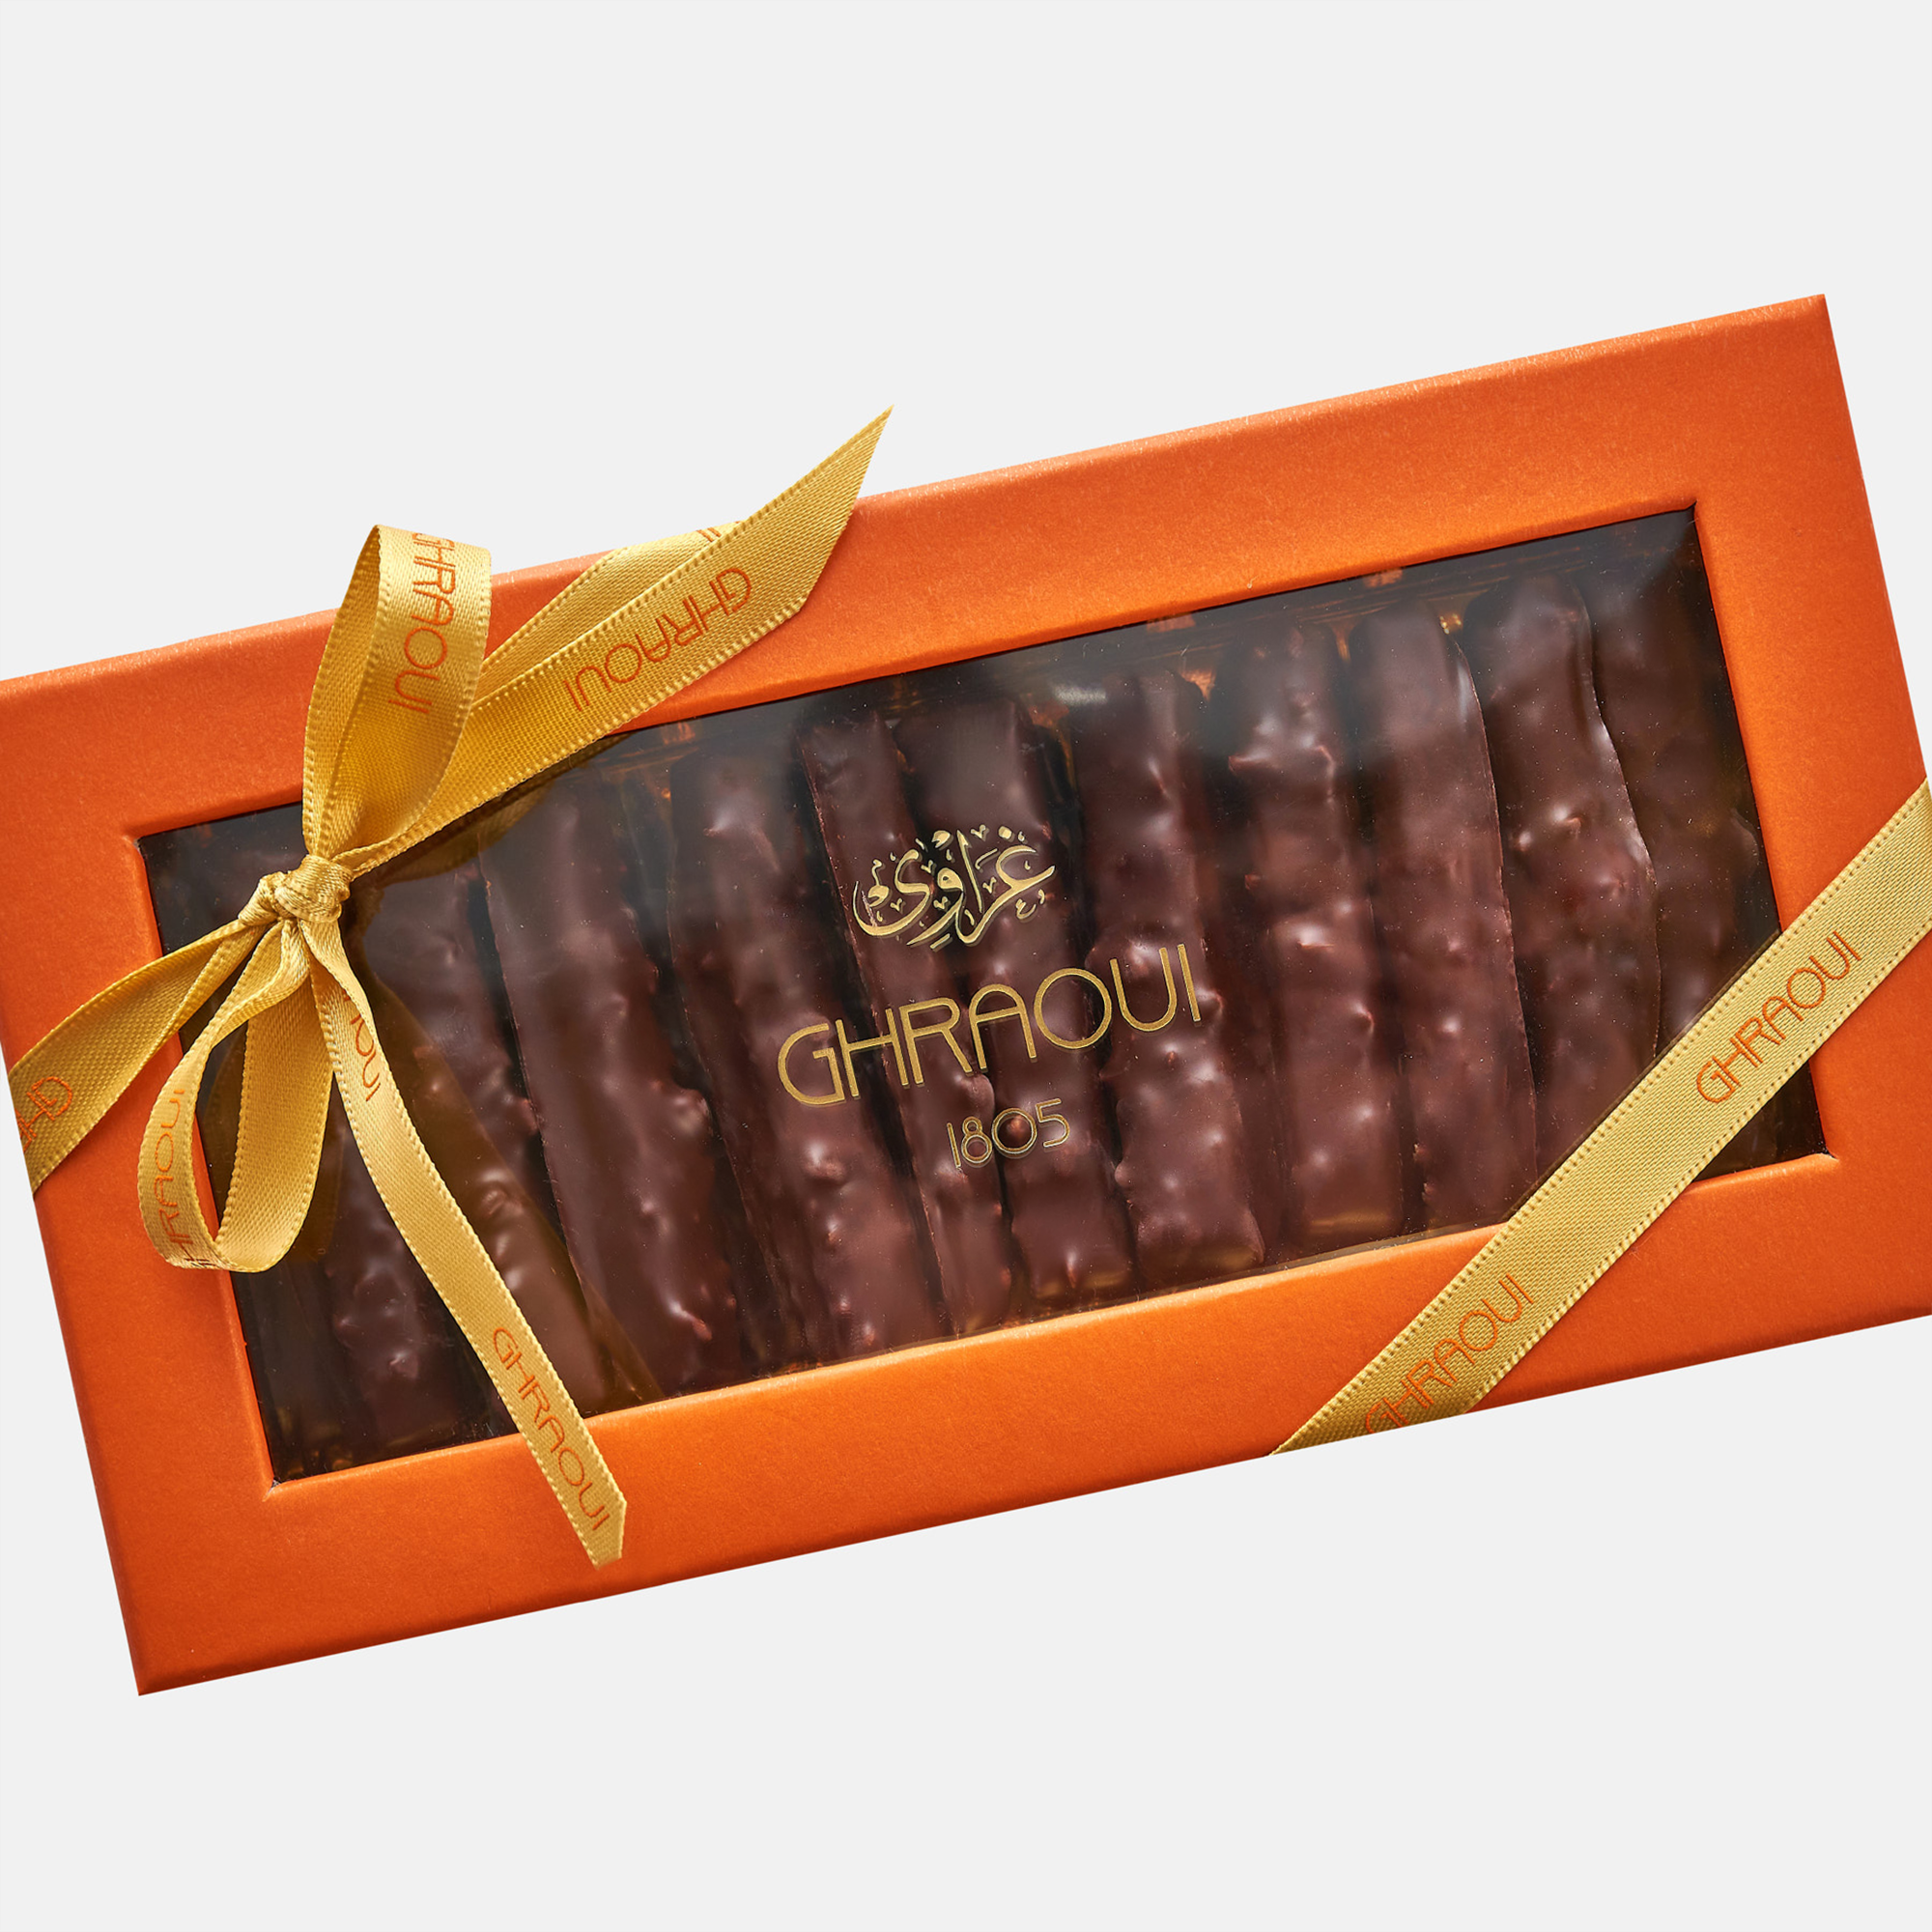 Candied orange peel with almond pieces - ghraoui-chocolate Edit alt text